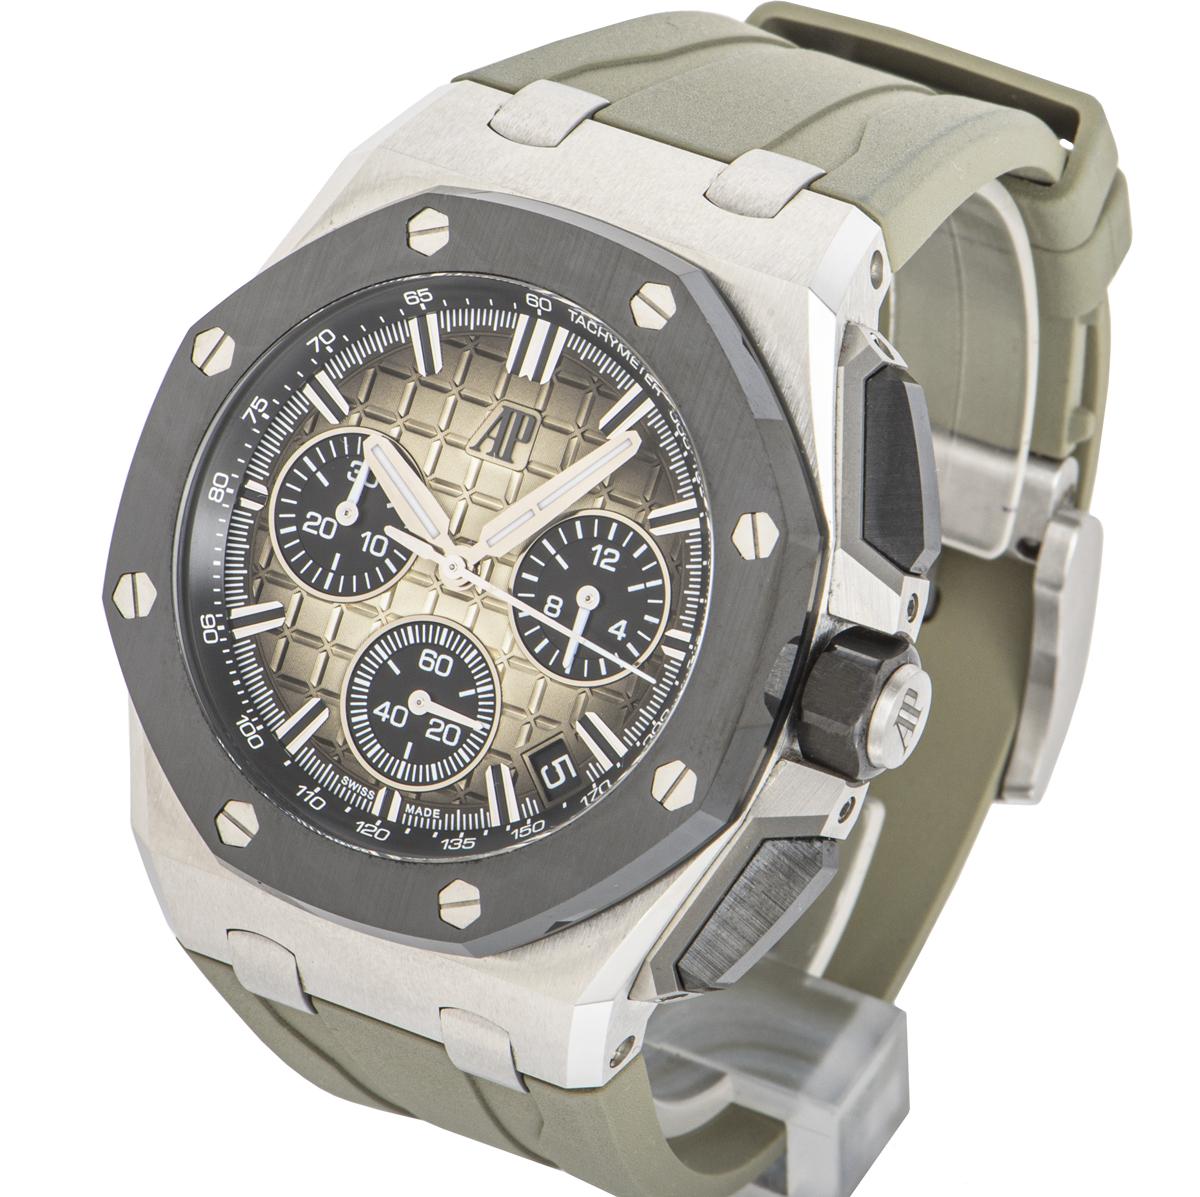 A newly designed 43mm Royal Oak Offshore from Audemars Piguet in stainless steel. Featuring a smoked light brown 